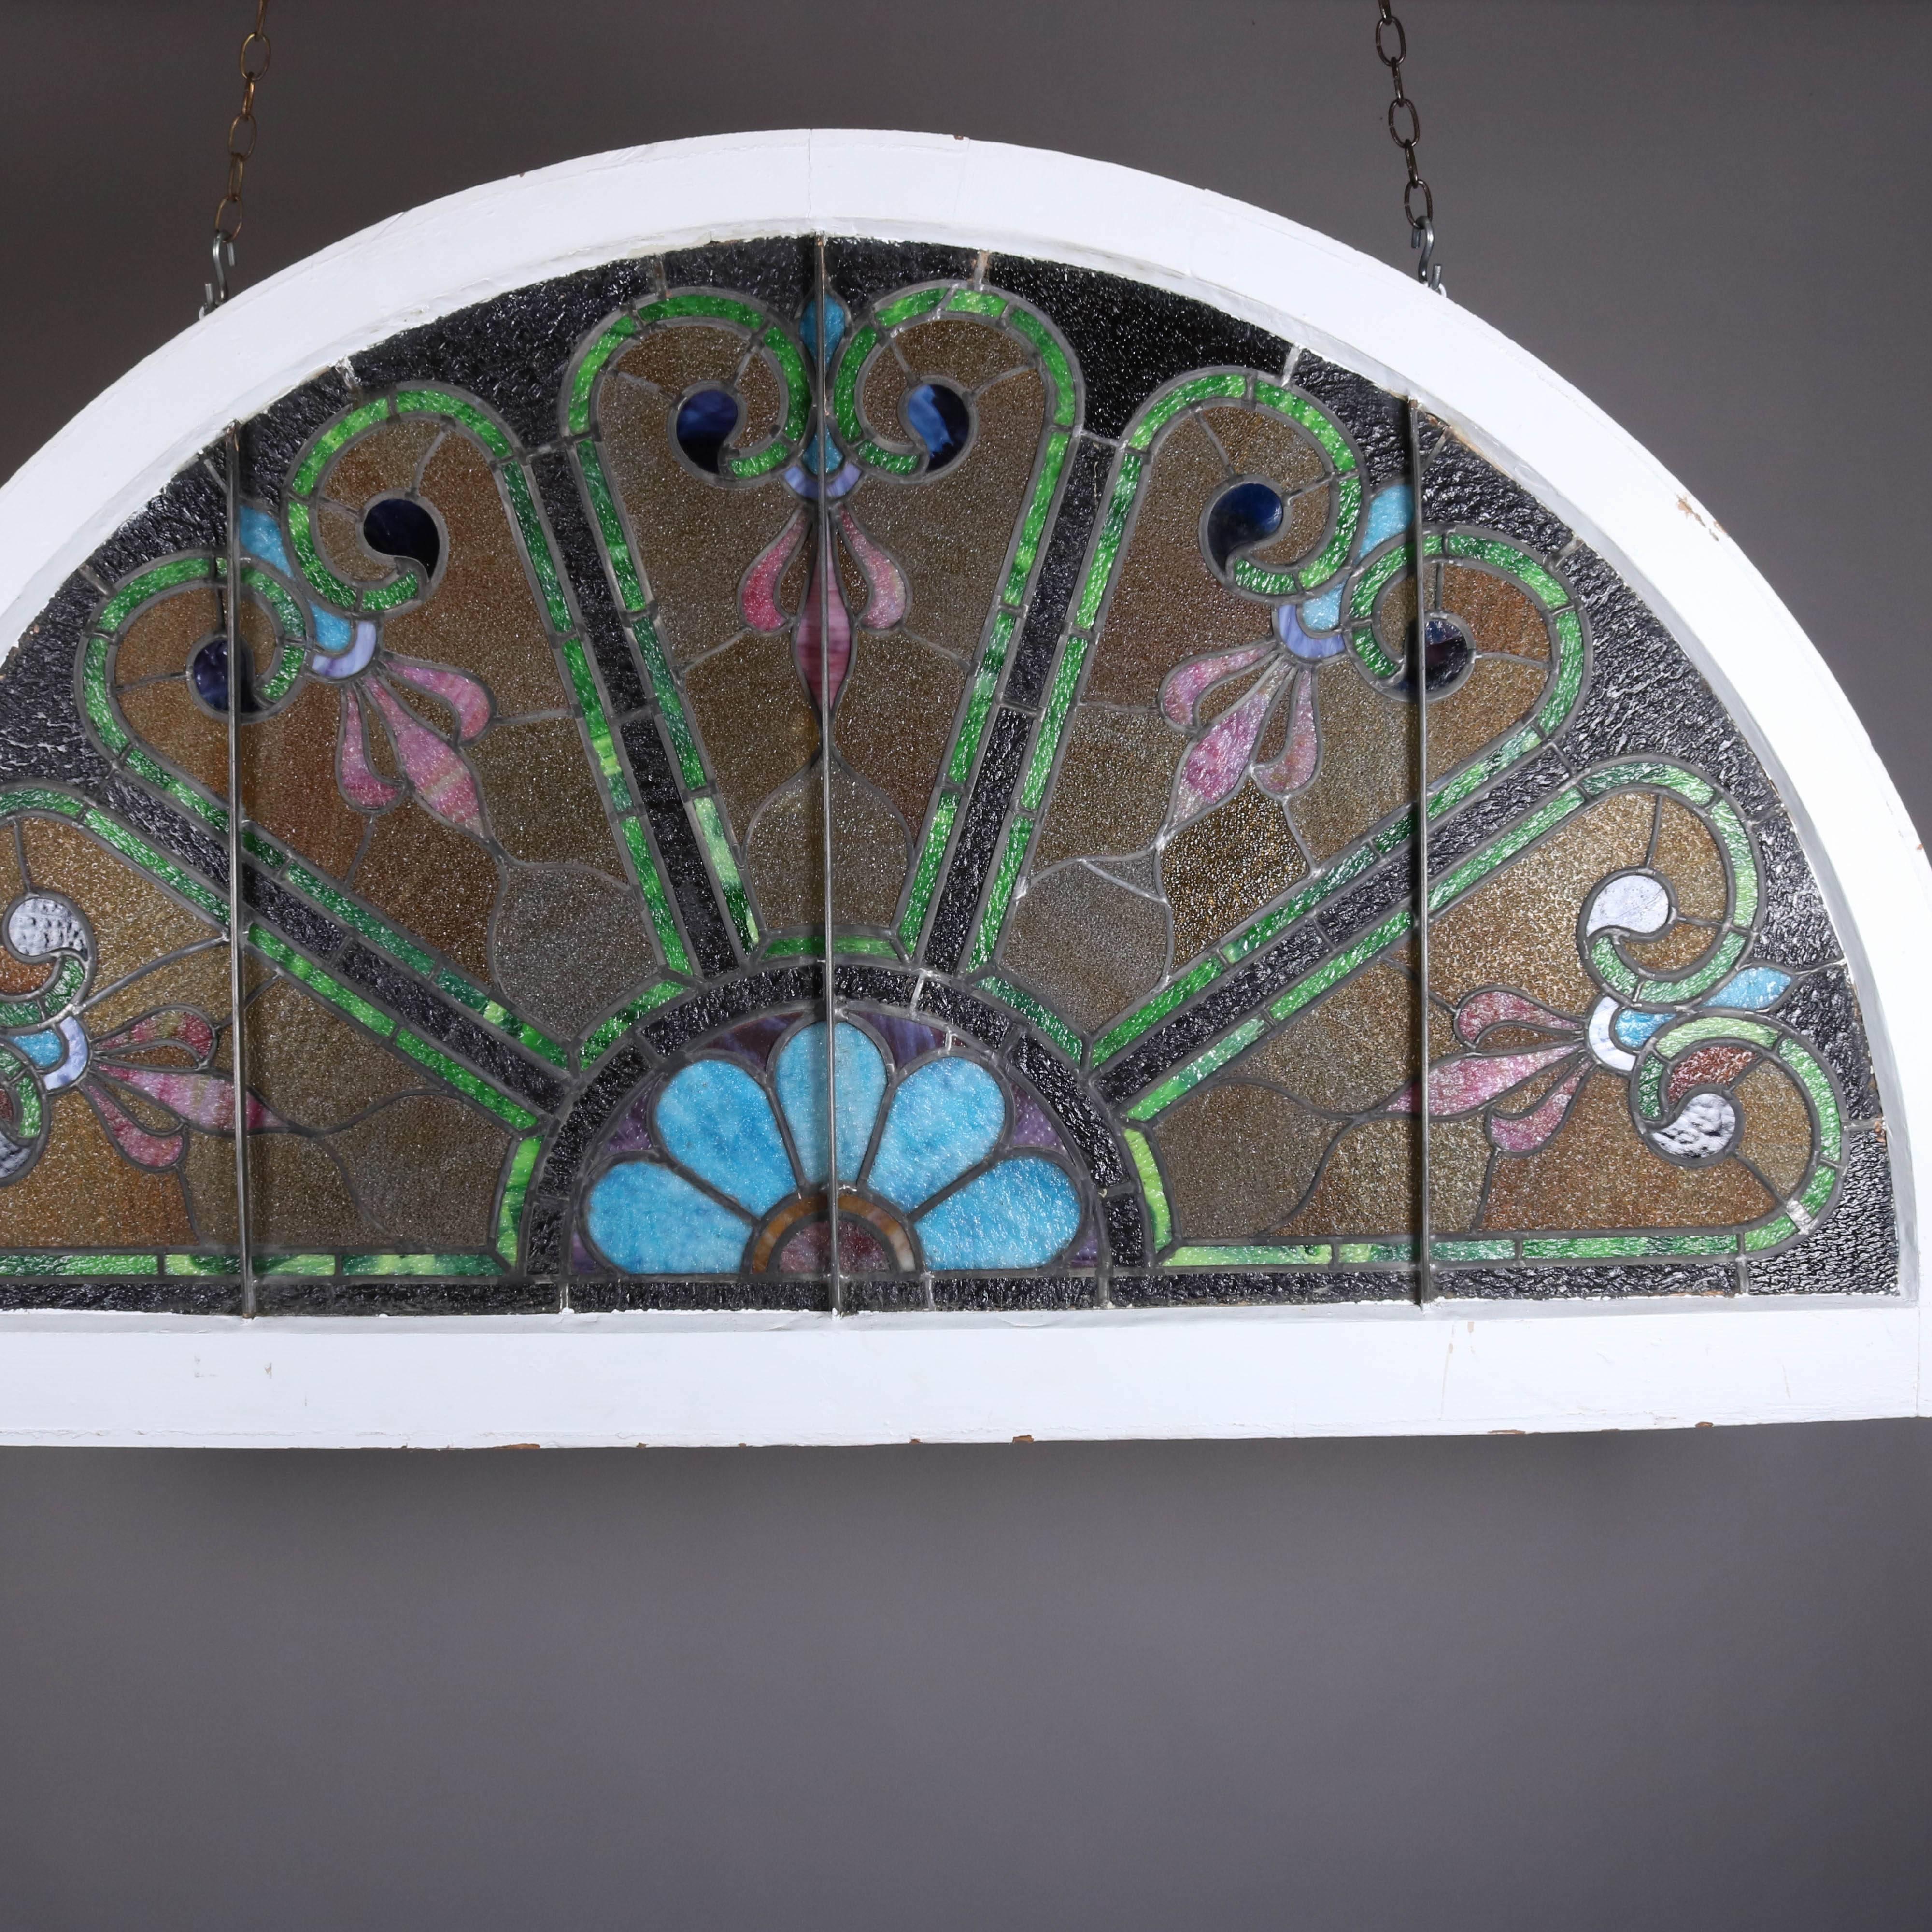 Antique stained and leaded glass arched transom window features stylized floral and scroll design panels in demilune form and seated in original wood frame, 19th century

Measures: 68